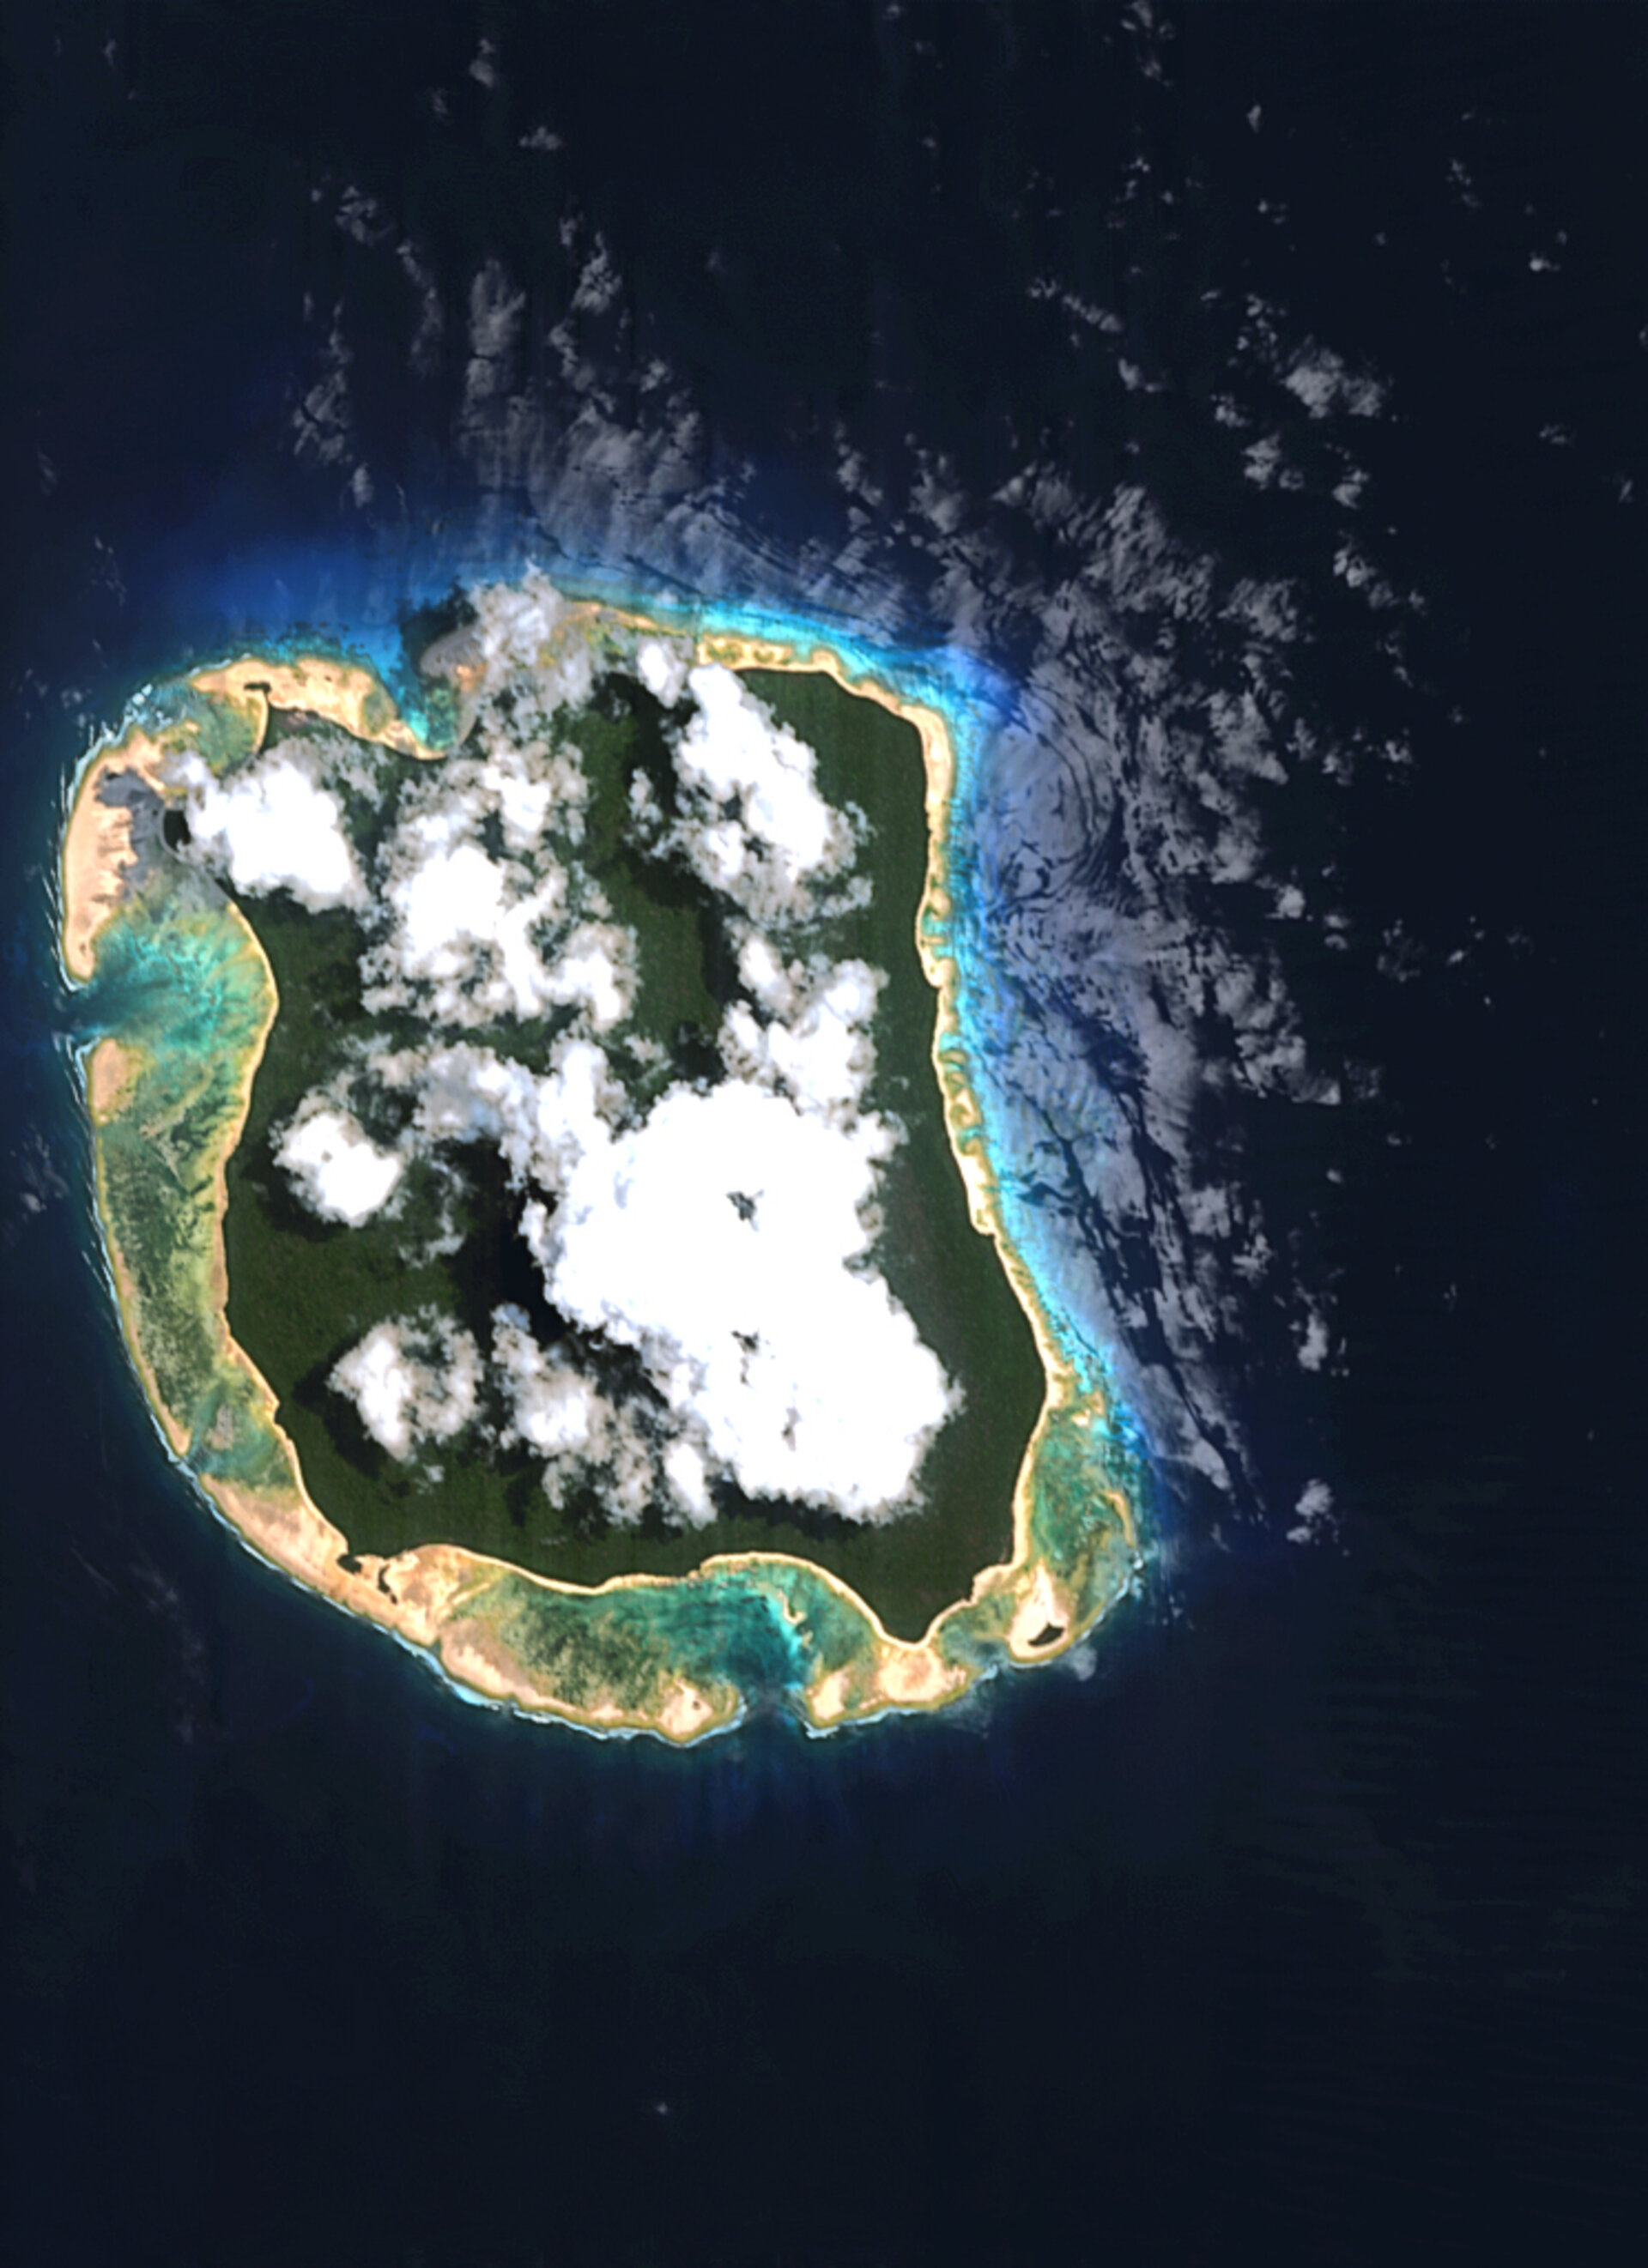 North Sentinel Island as seen from ESA's Proba satellite